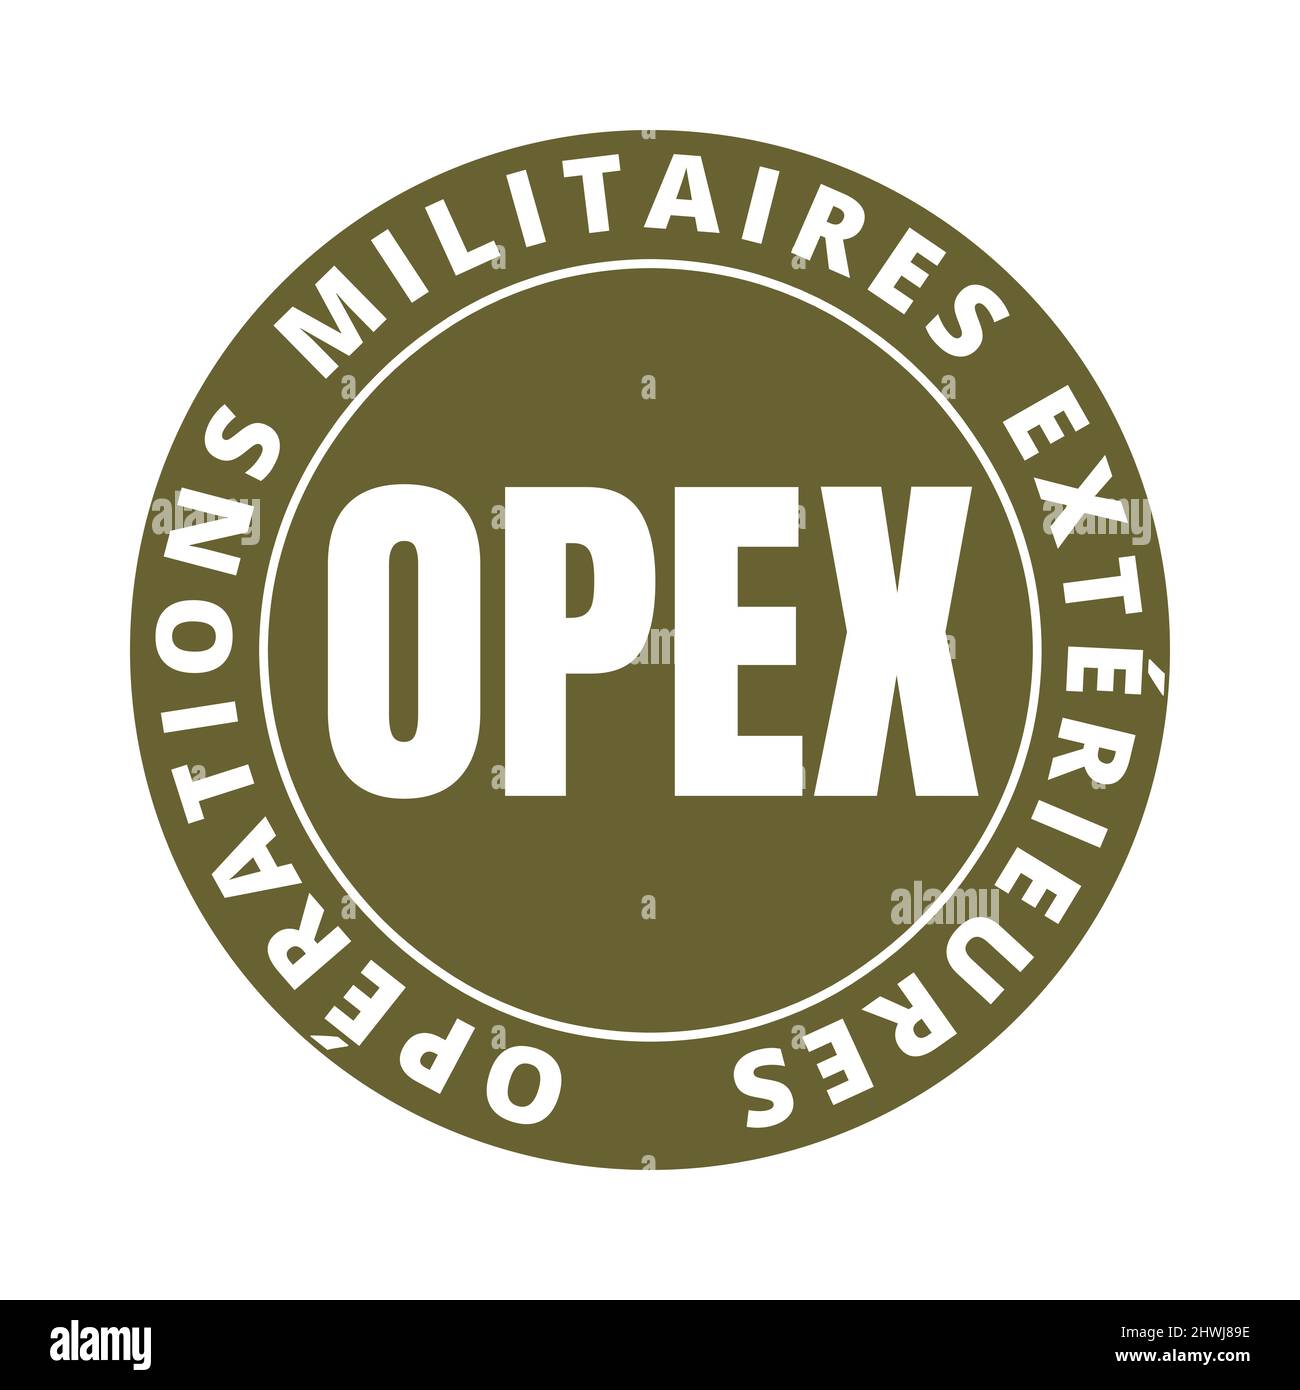 OPEX external military operations symbol called OPEX operations militaires exterieures in french language Stock Photo